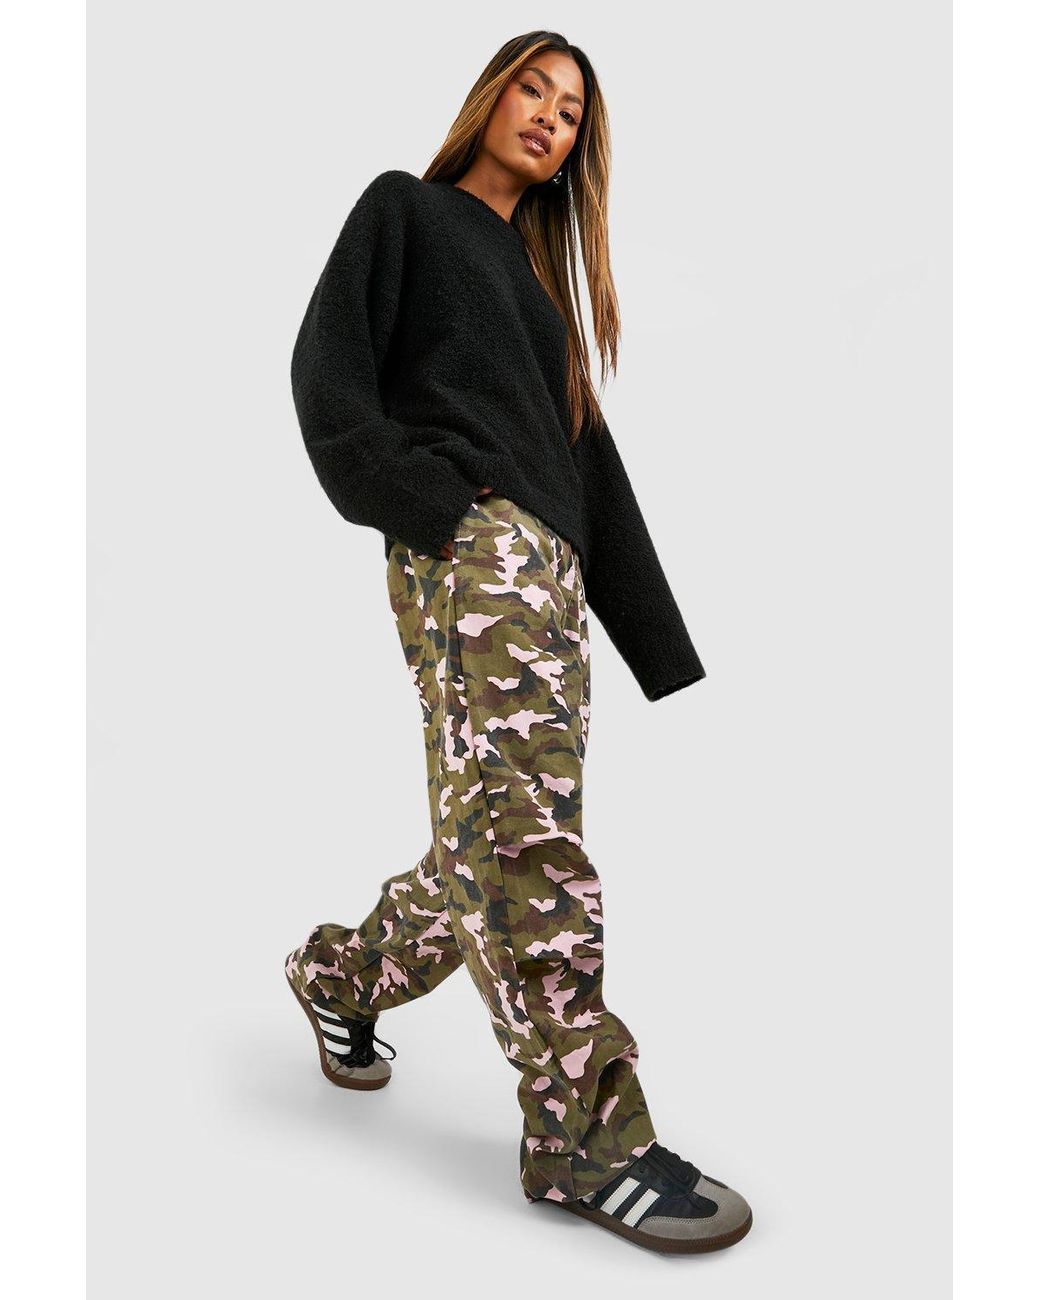 Pockets For Women - Limited Collection Curve Dark Green Camo Cargo Parachute  Trousers, Women's Curve & Plus Size, Limited Collection